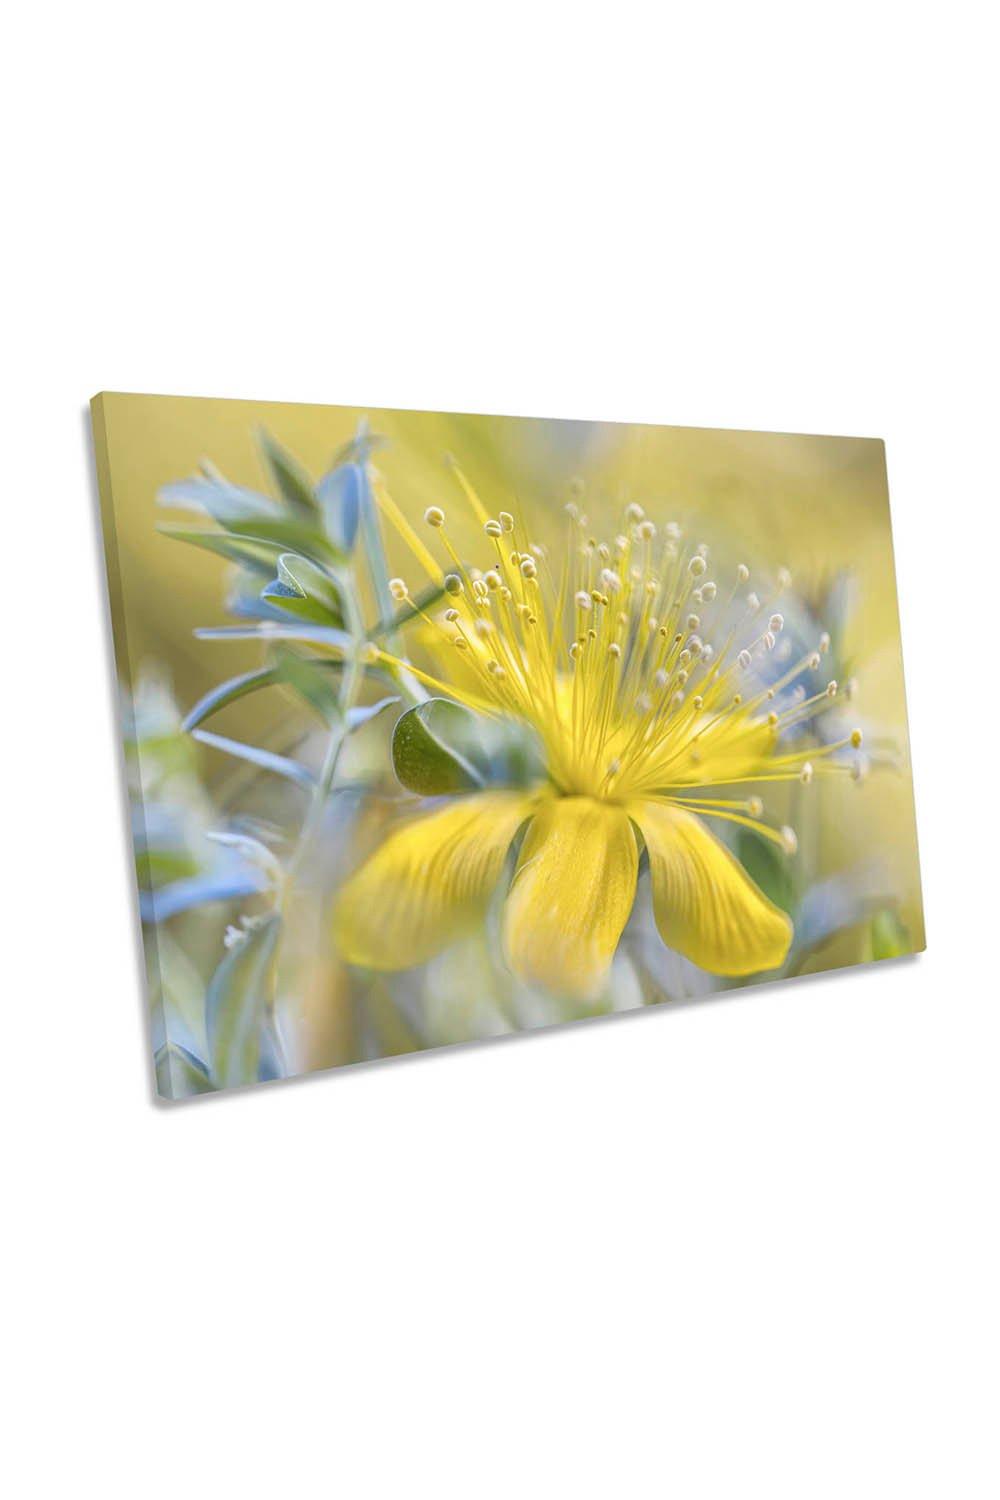 Hypericum Yellow Flower Floral Canvas Wall Art Picture Print